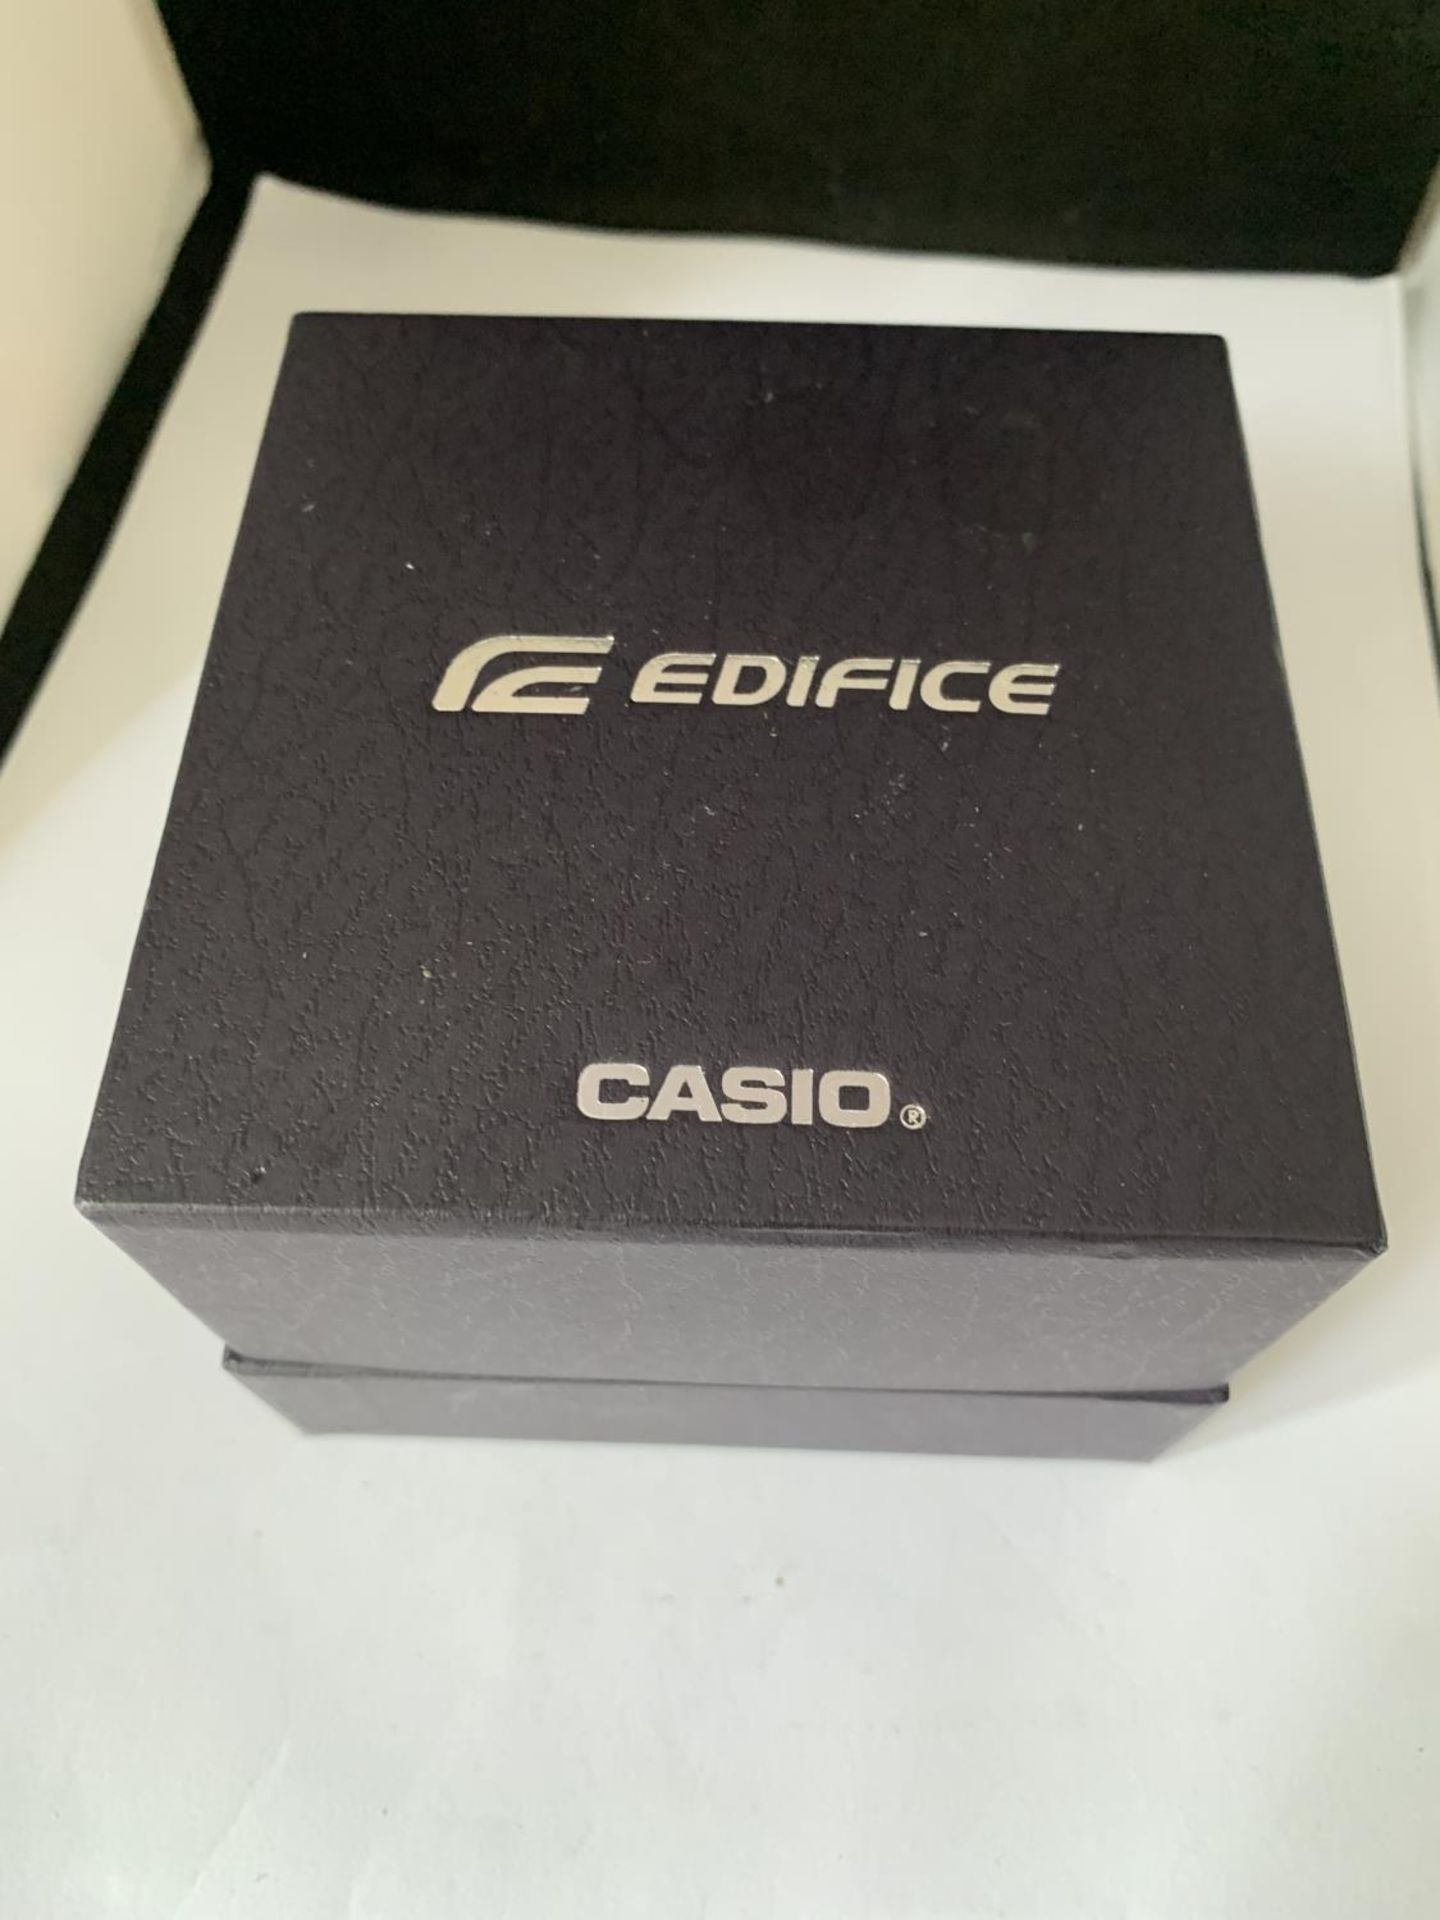 AN AS NEW AND BOXED CASIO EDIFICE BLUE TOOTH WRIST WATCH SEEN WORKING BUT NO WARRANTY - Bild 3 aus 3